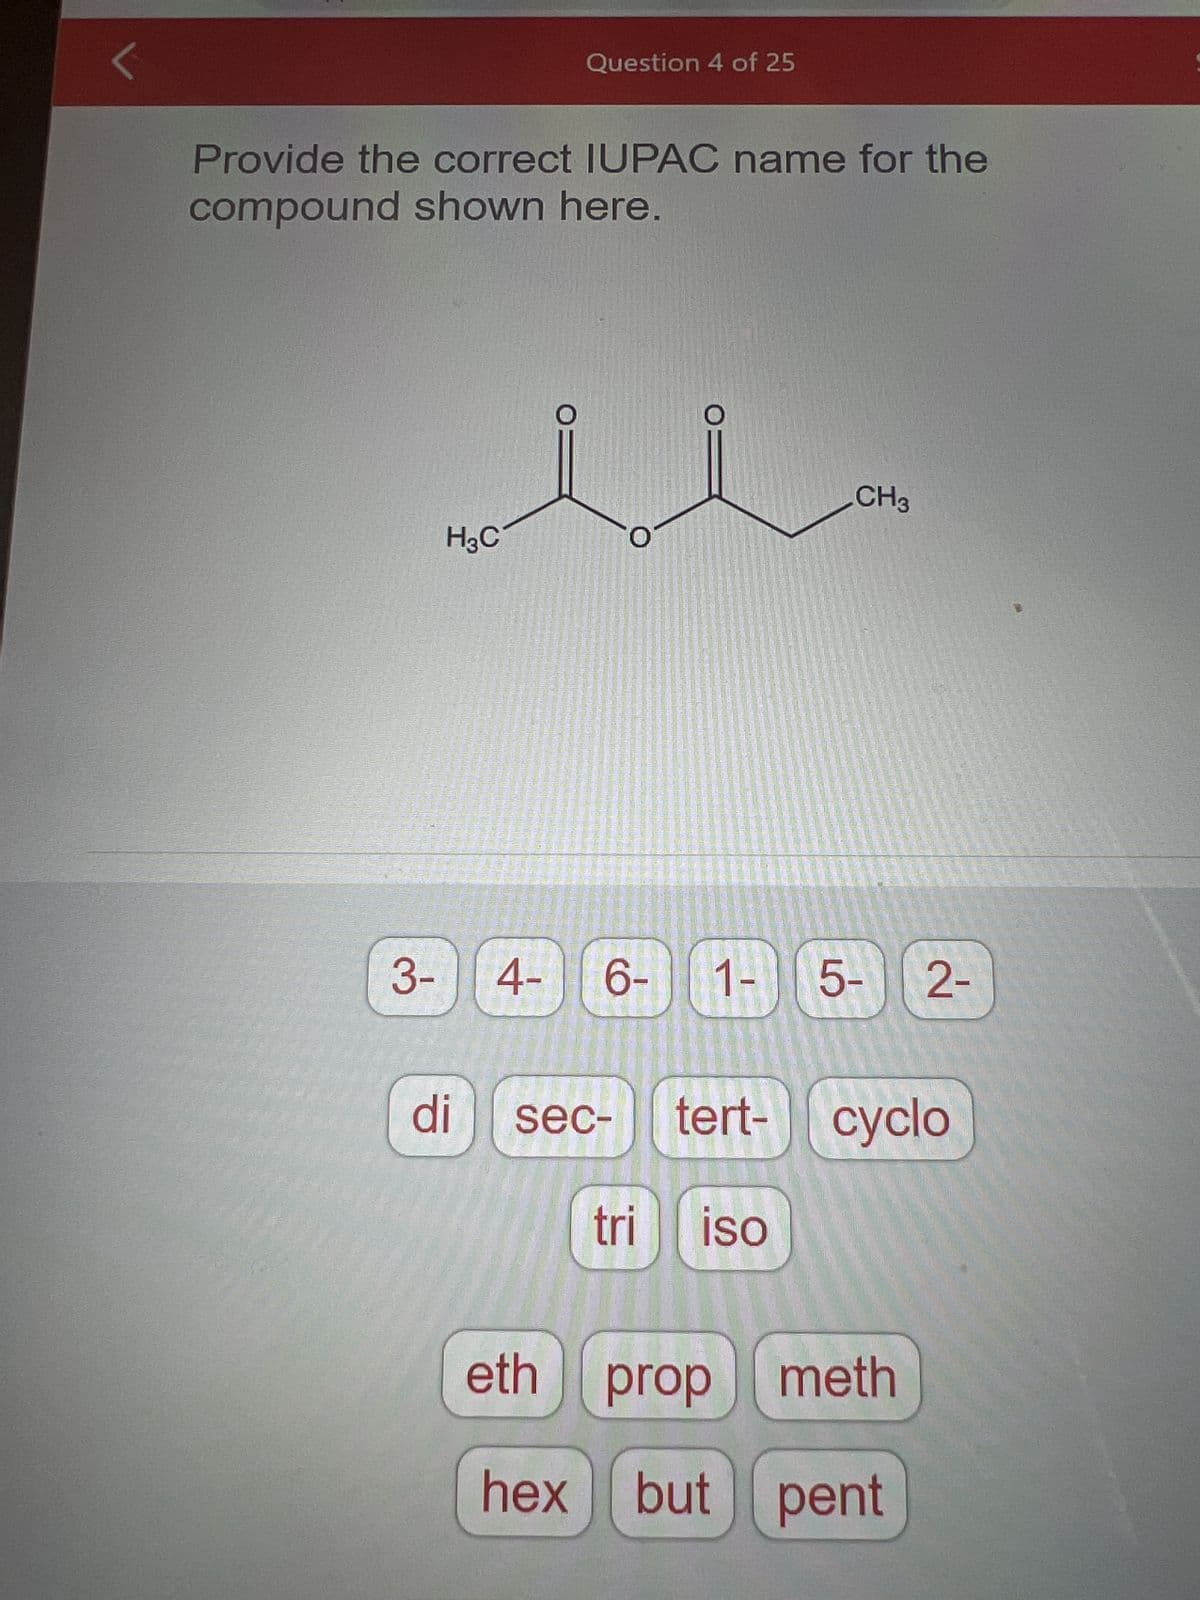 Provide the correct IUPAC name for the
compound shown here.
3-
H3C
Question 4 of 25
di
4- 6- 1-) (5- 2-
sec-
CH3
tert- cyclo
tri ISO
eth prop meth
hex but pent